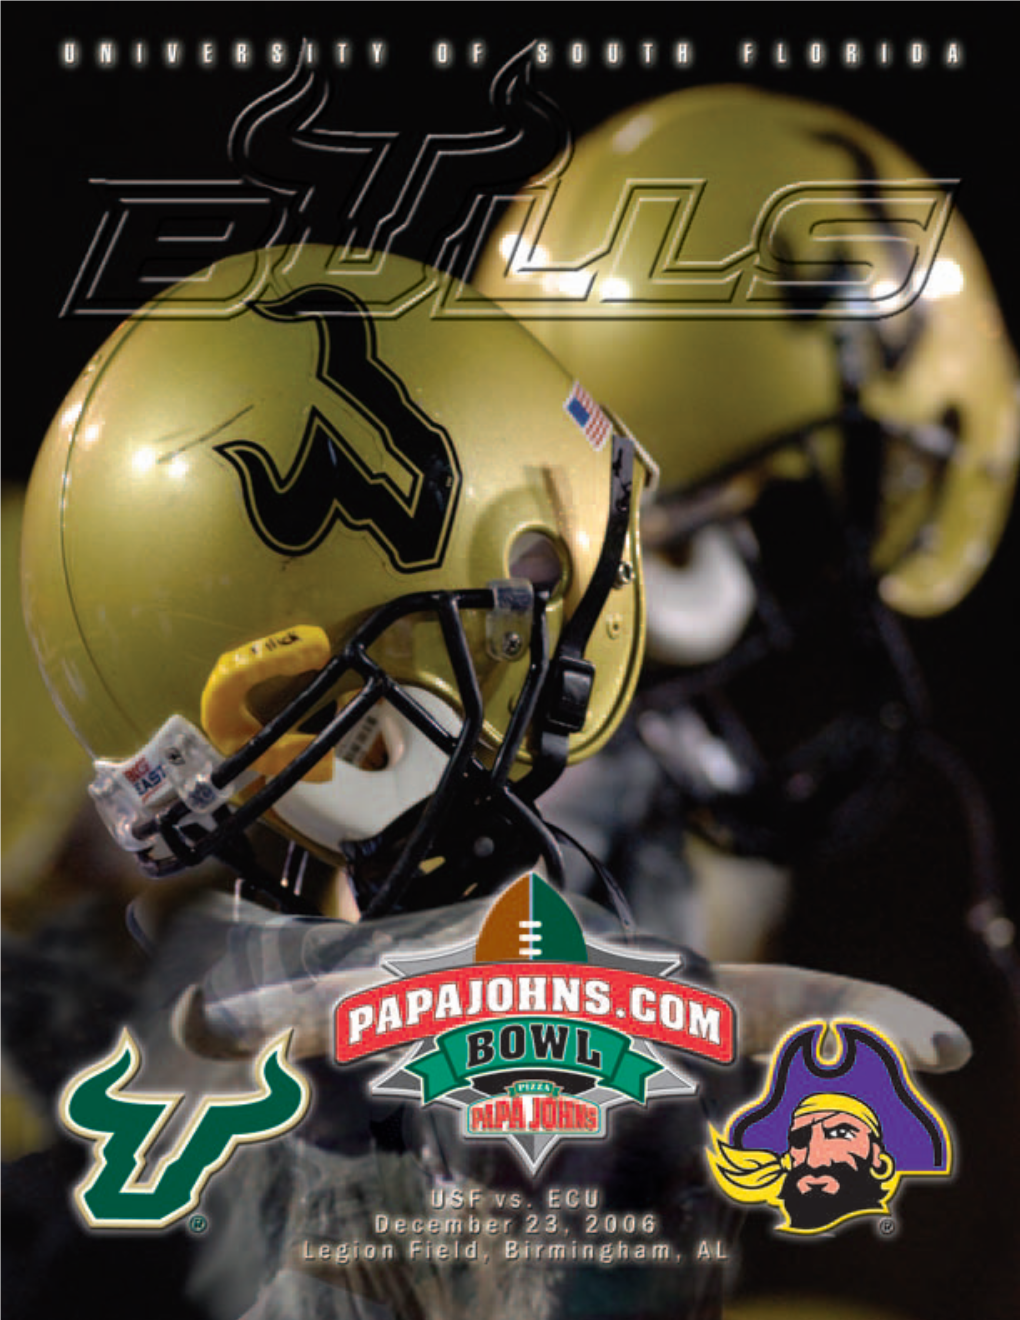 2006 USF FB Game Notes